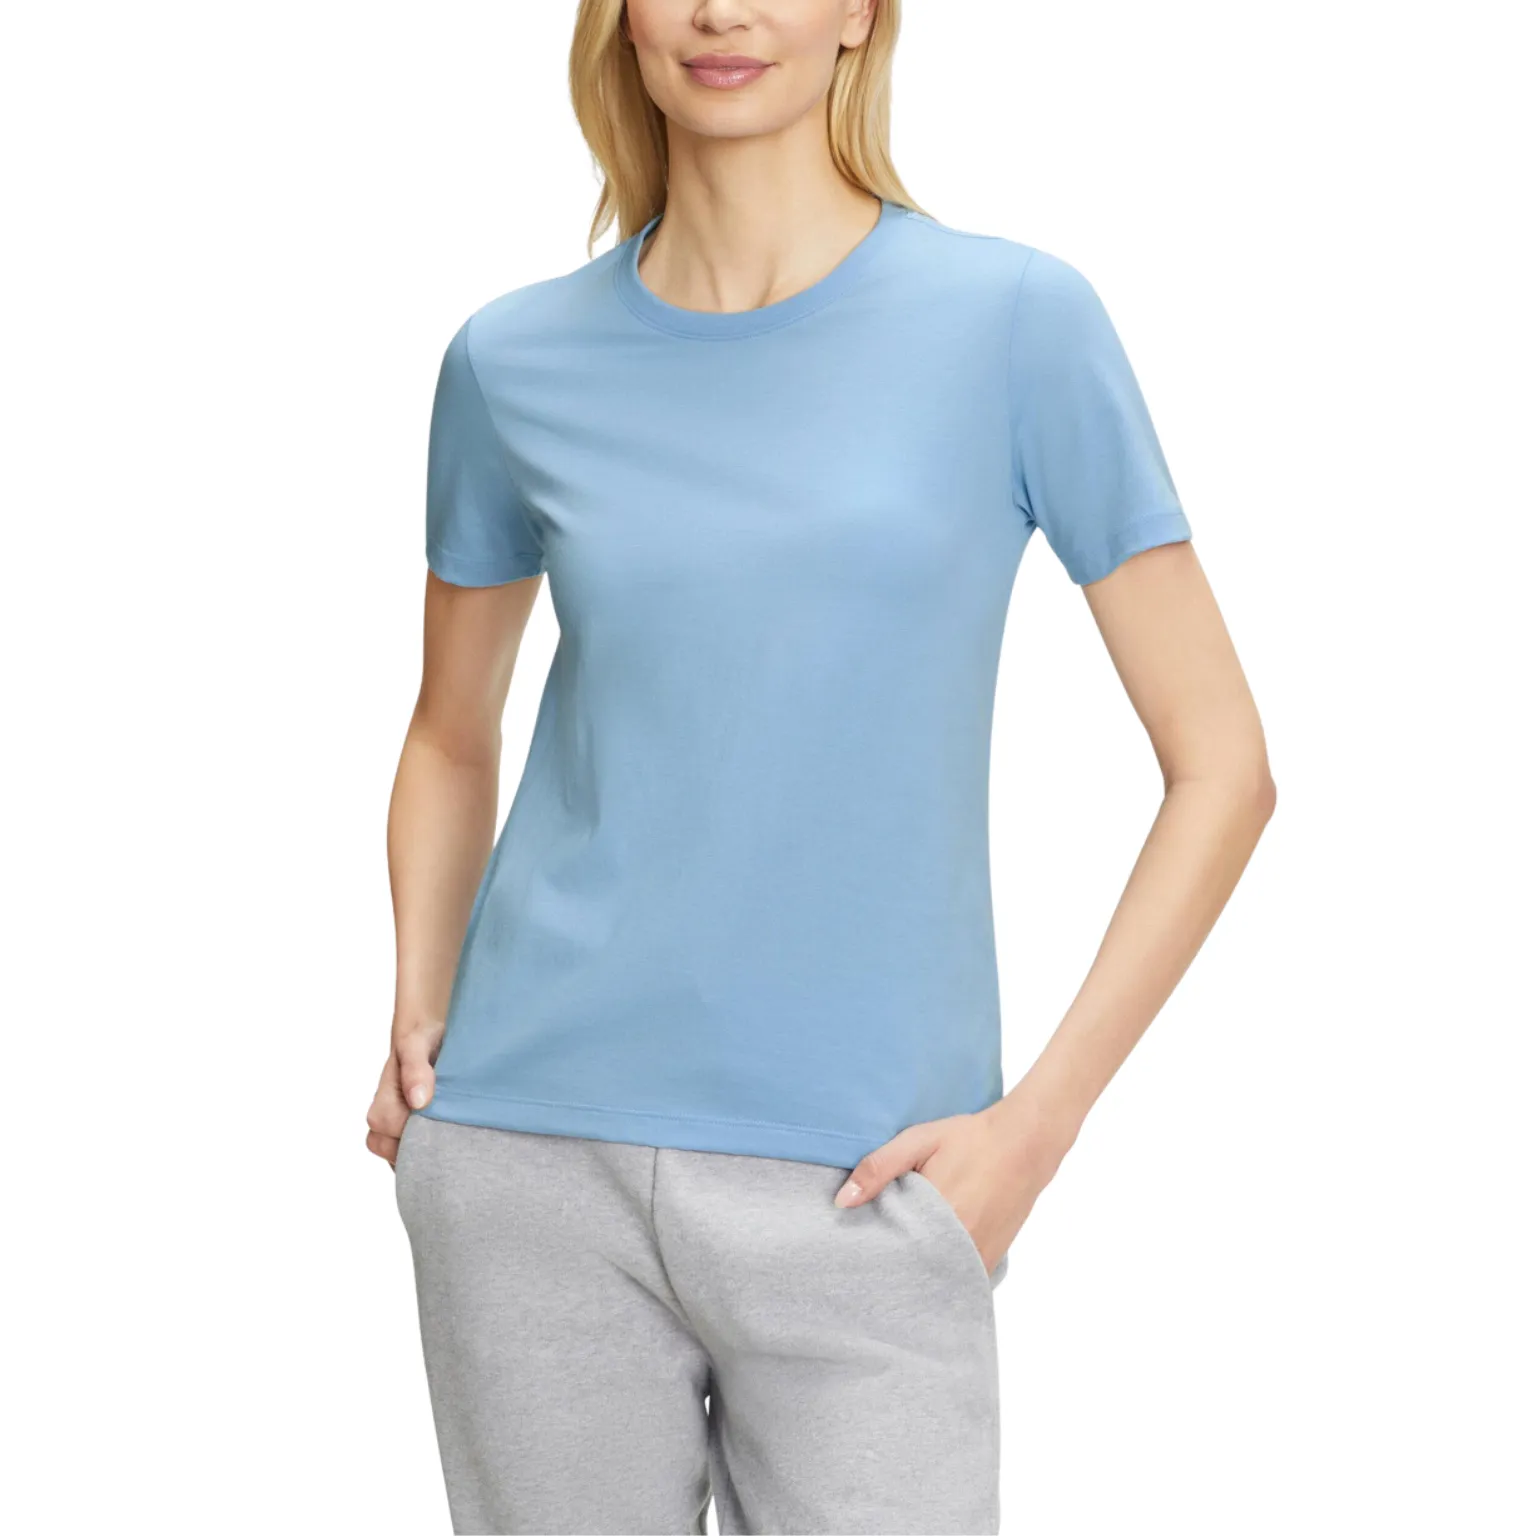 Round Neck T-shirt manufacturing with superior quality